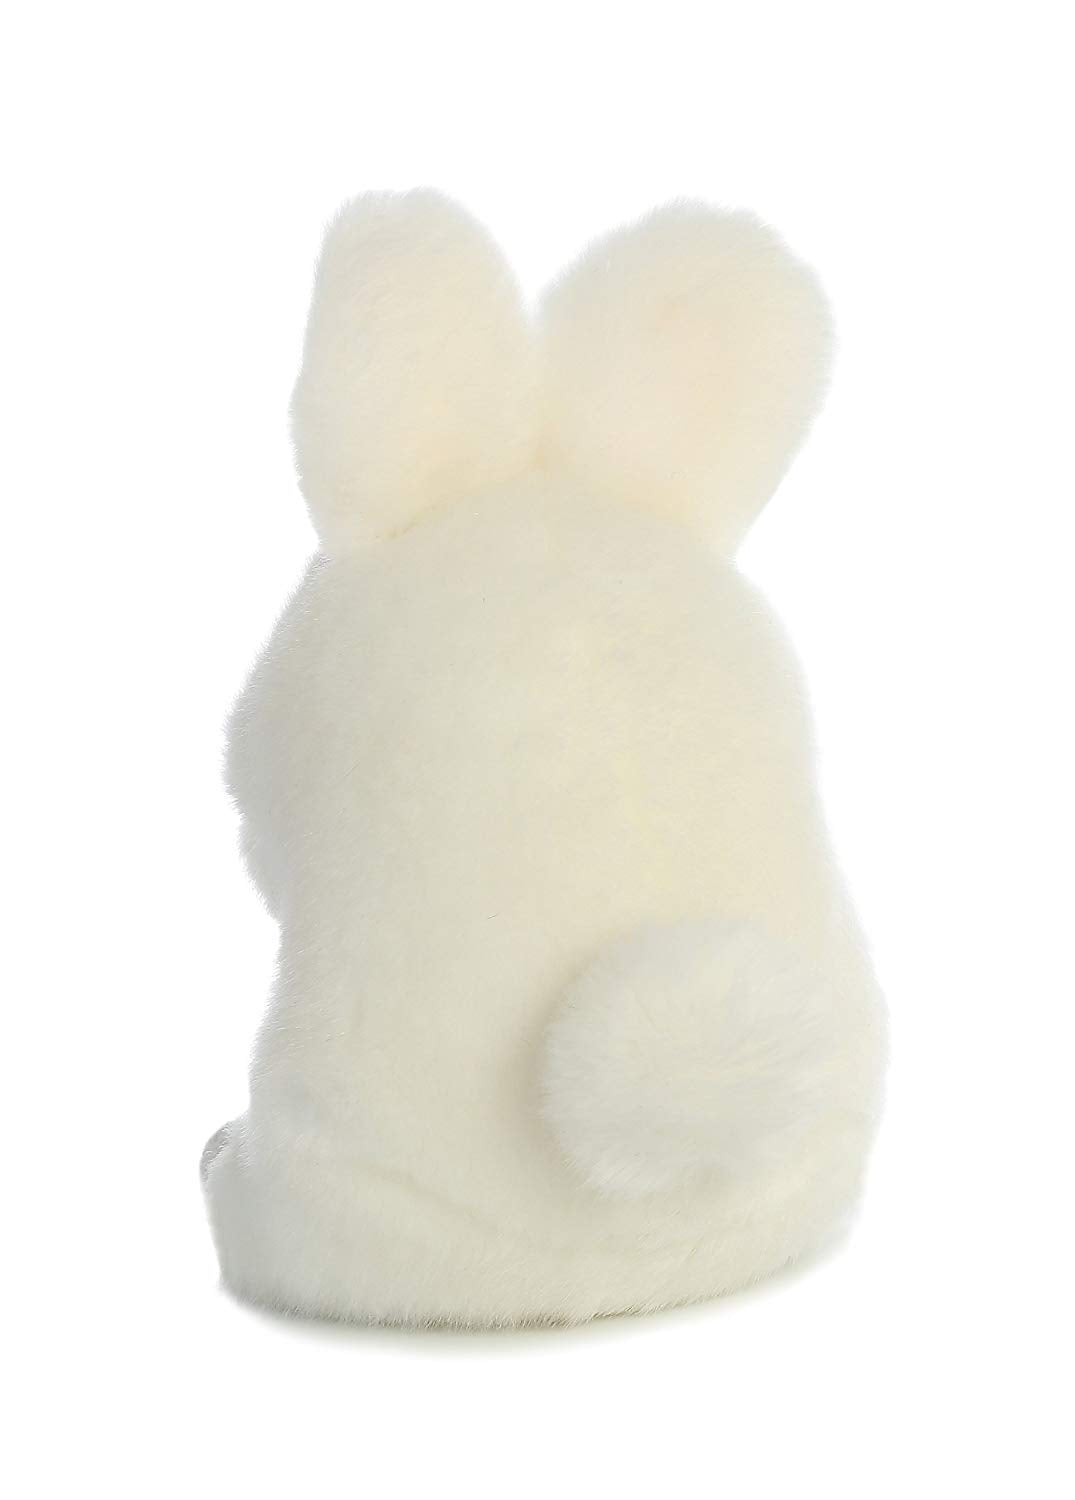 5 inch tall plush white rabbit. Pink ears and black eyes.